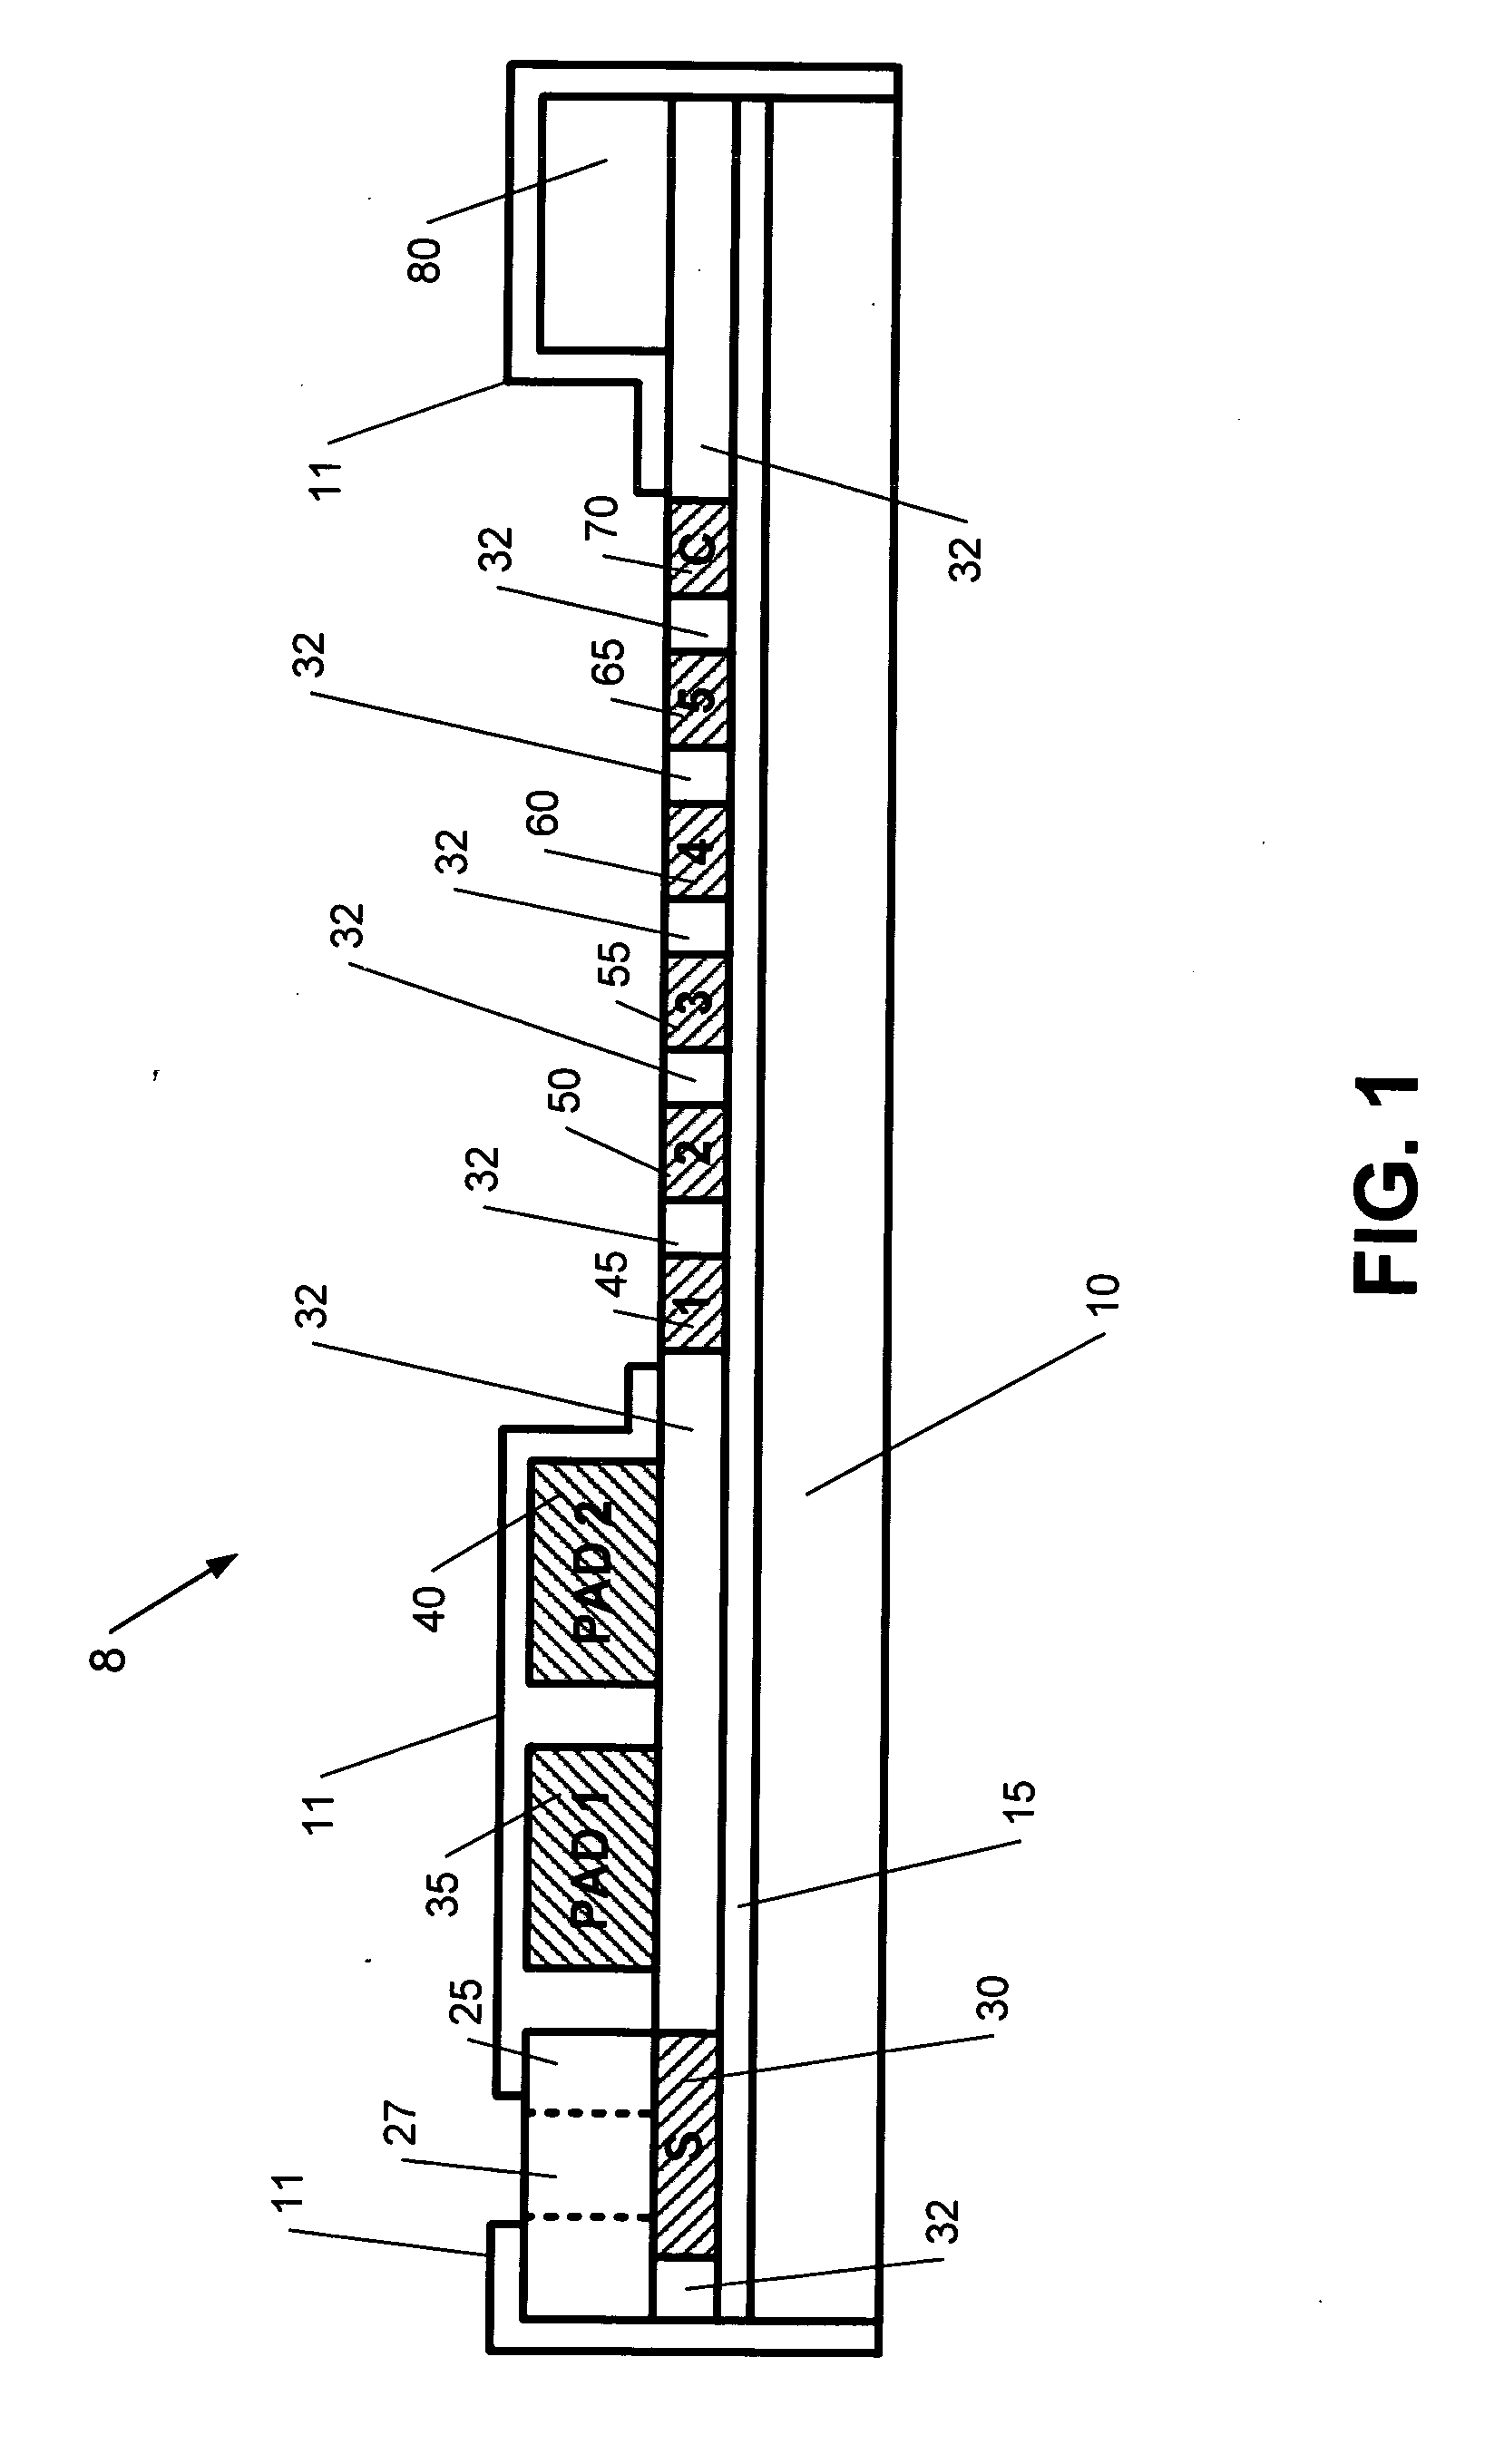 Antibody detection method and device for a saliva sample from a non-human animal